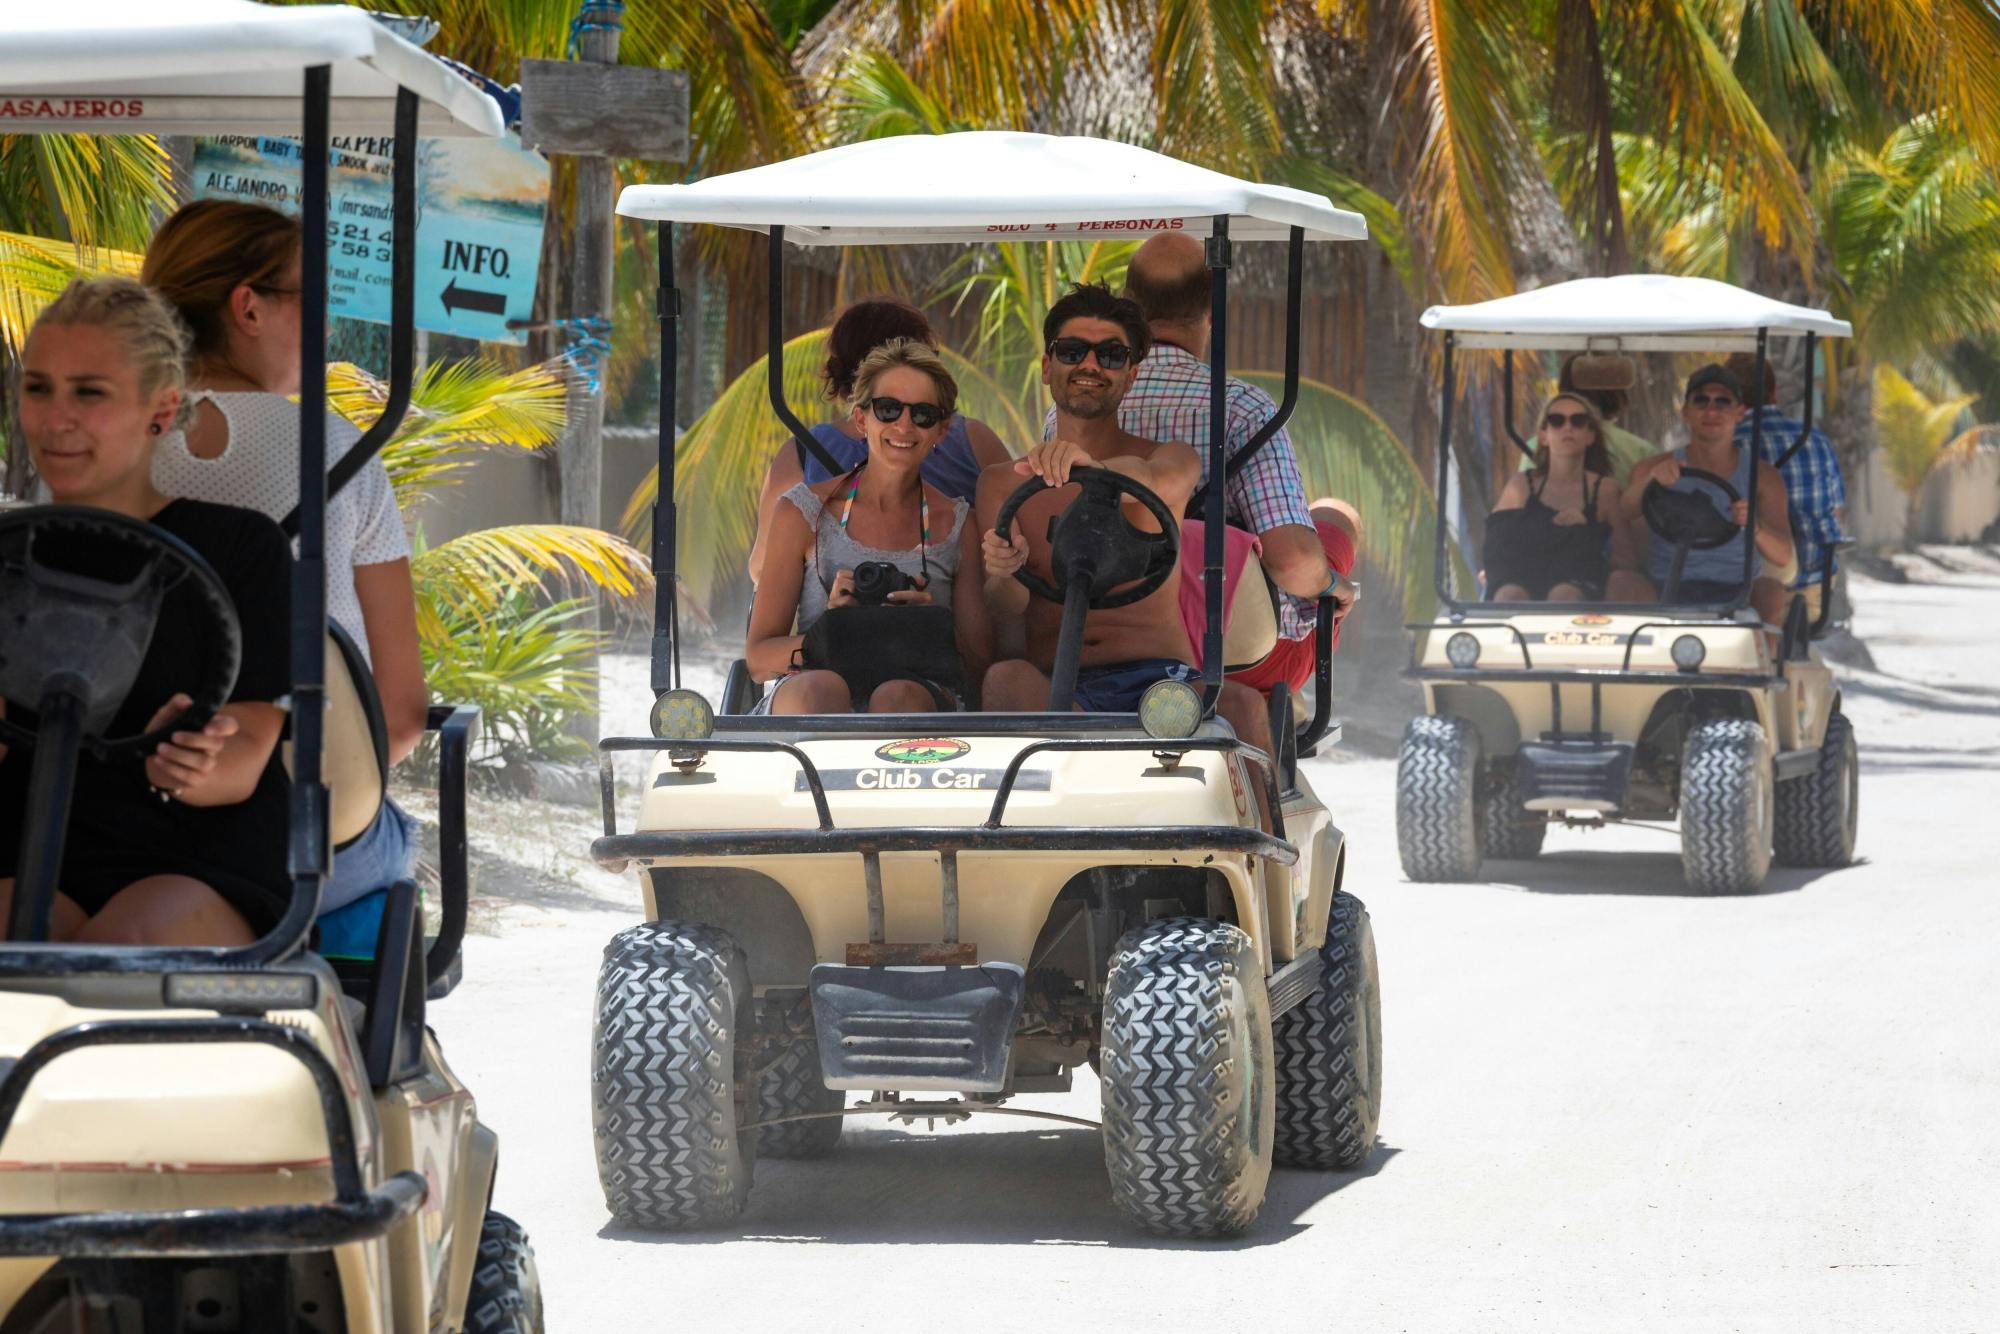 Private Holbox Island Boat and Buggy Tour